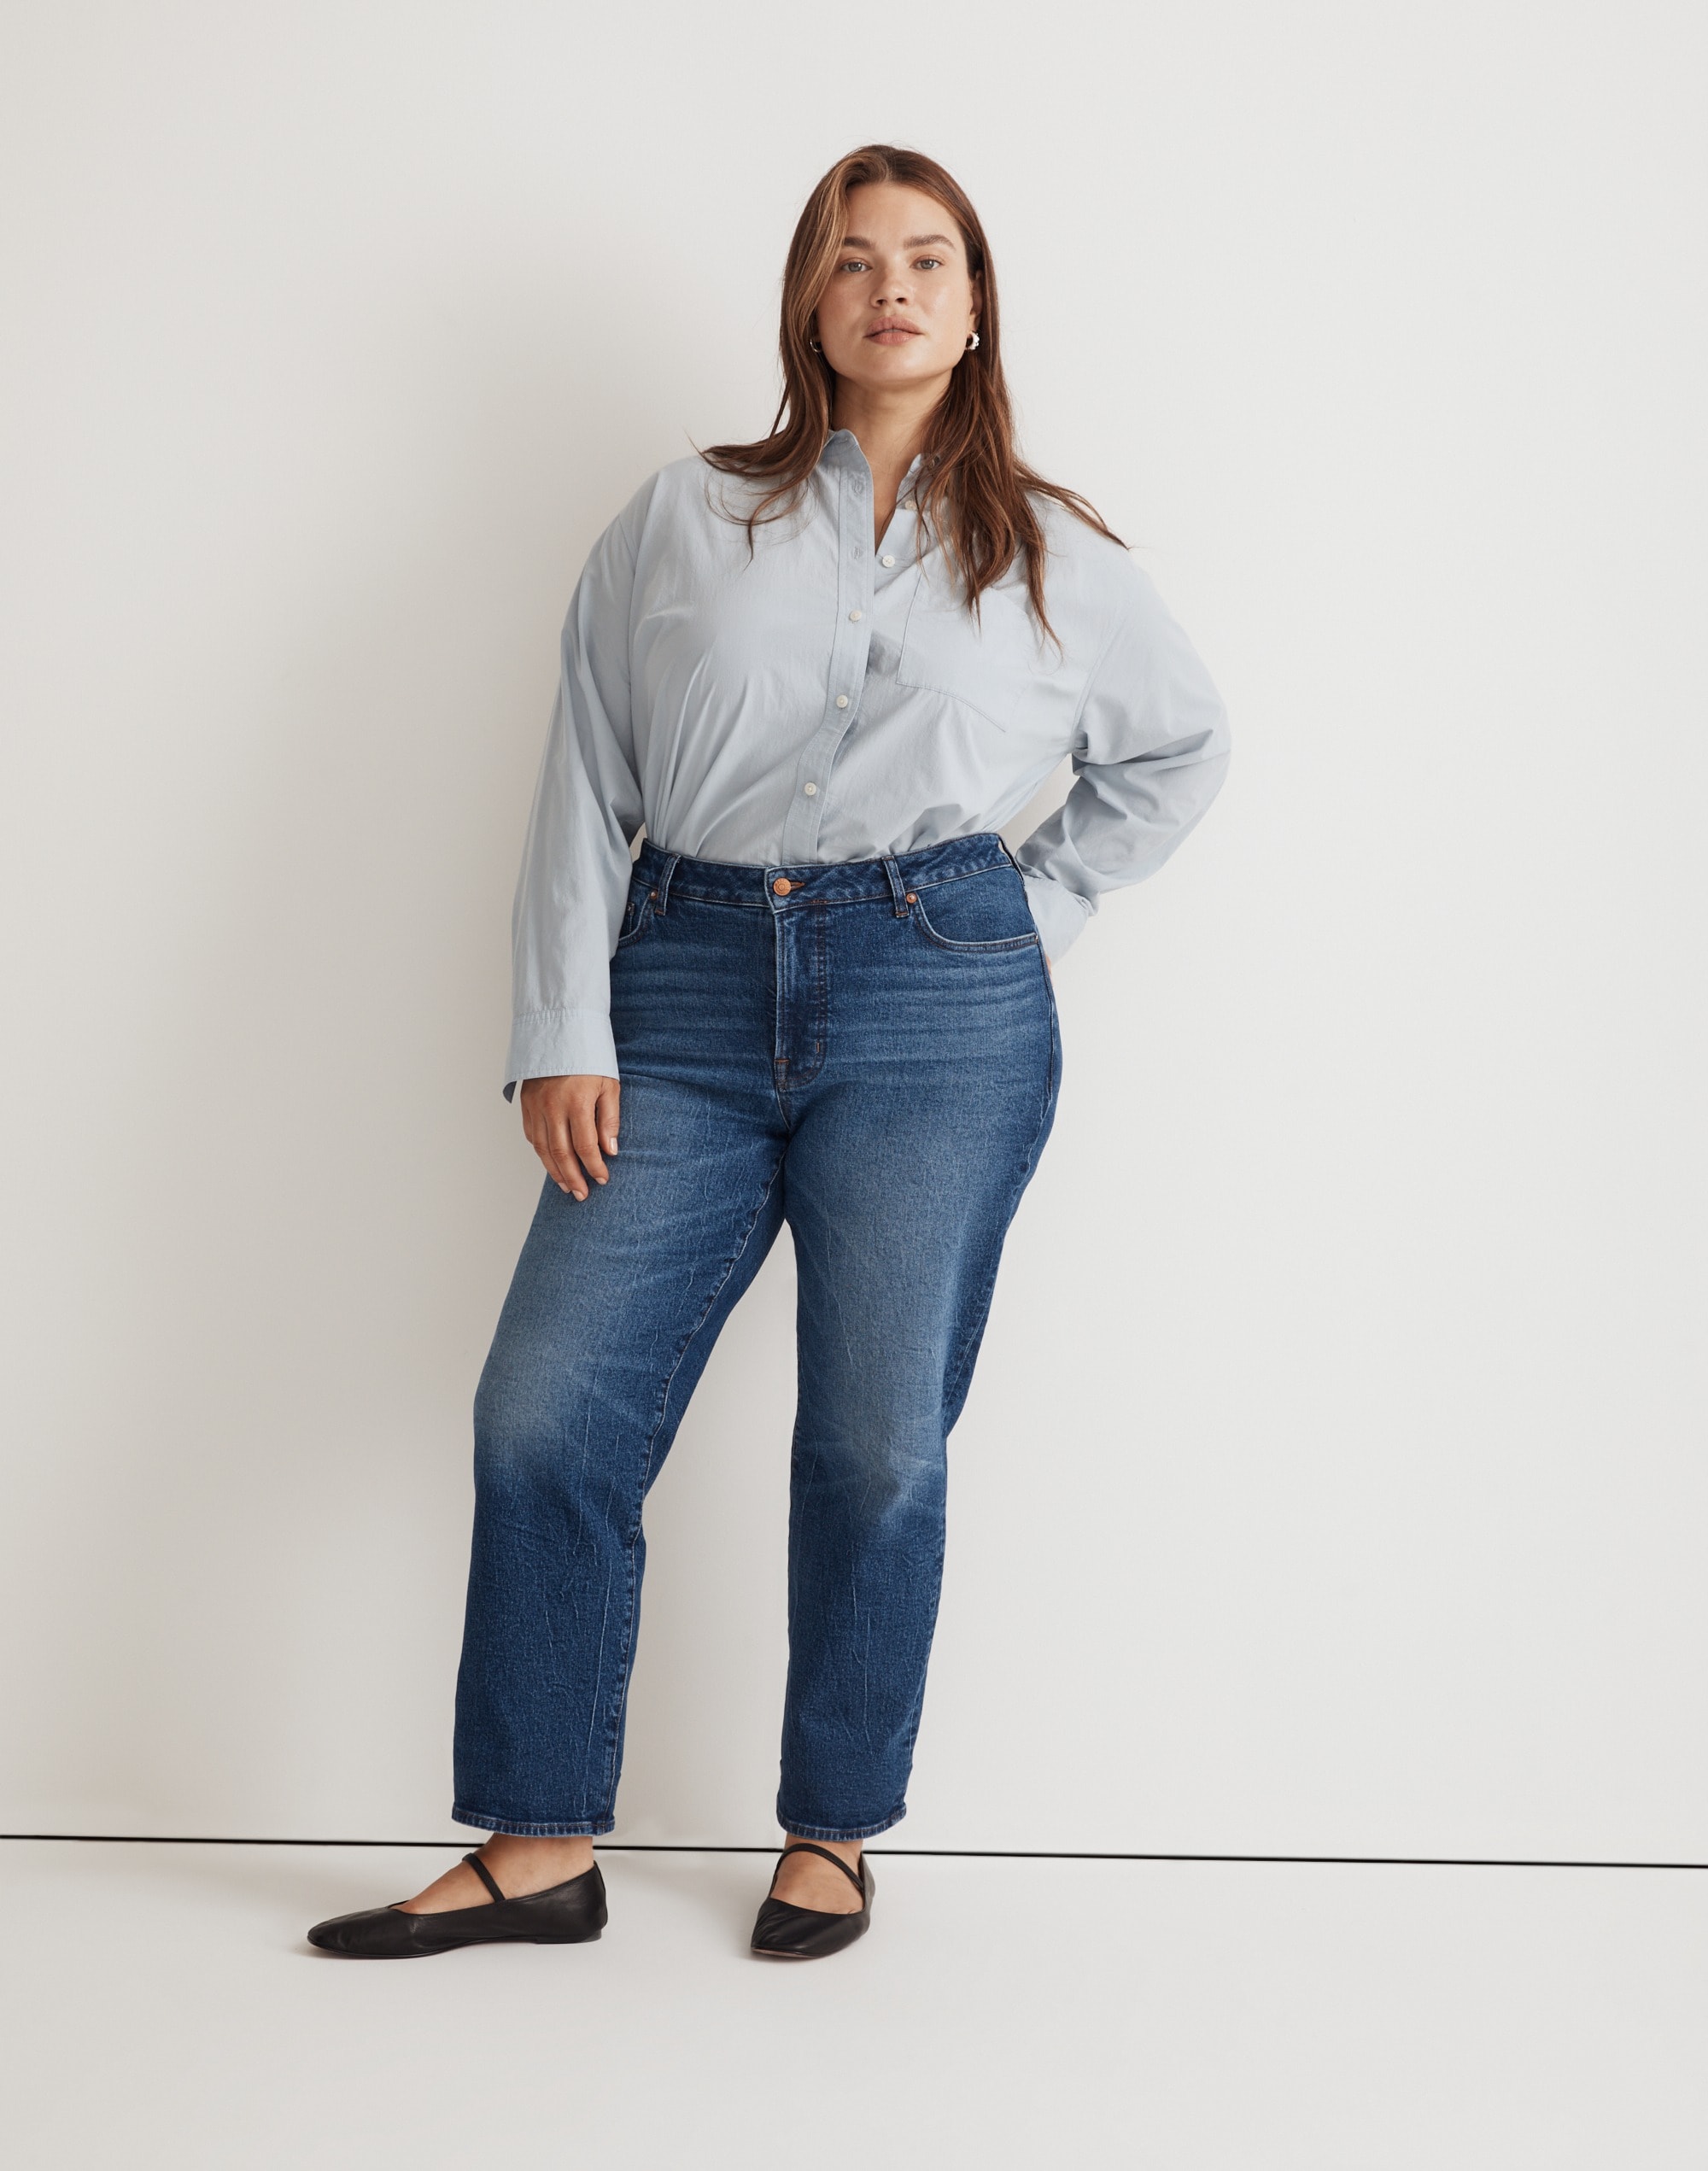 The Plus '90s Straight Jean in Barlow Wash